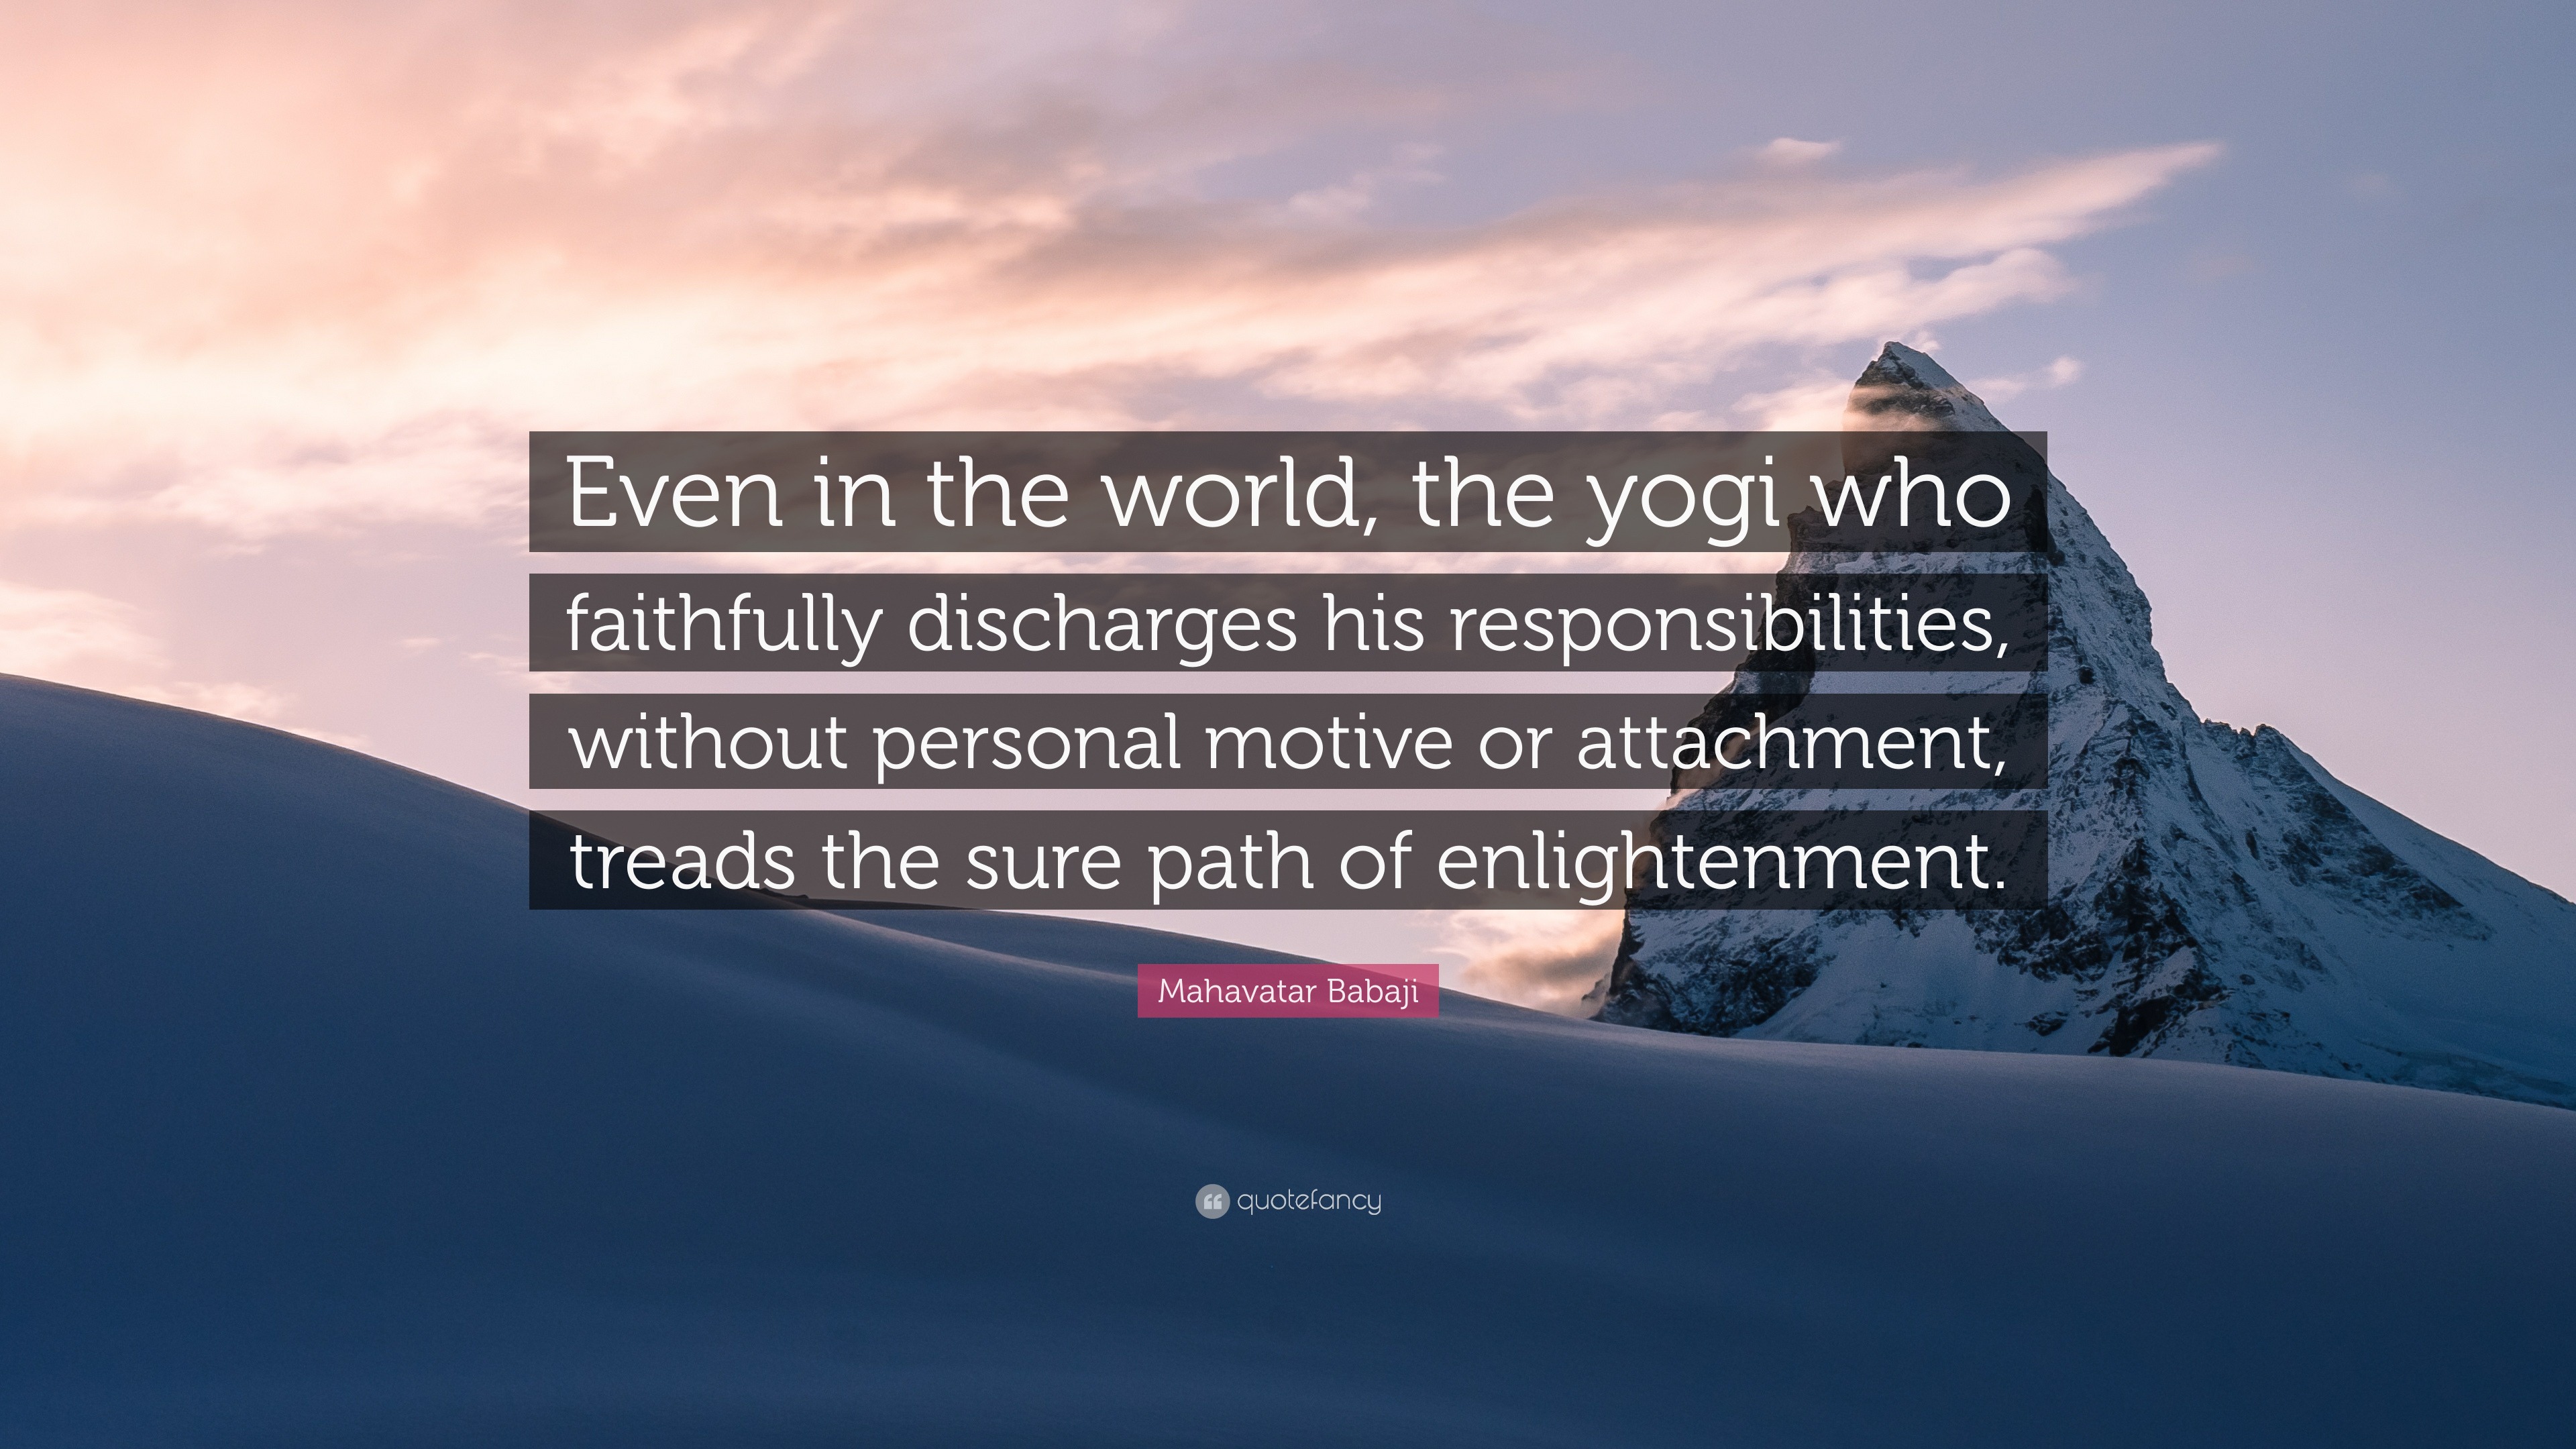 Mahavatar Babaji Quote: “Even in the world, the yogi who faithfully  discharges his responsibilities, without personal motive or attachment,  tread...”